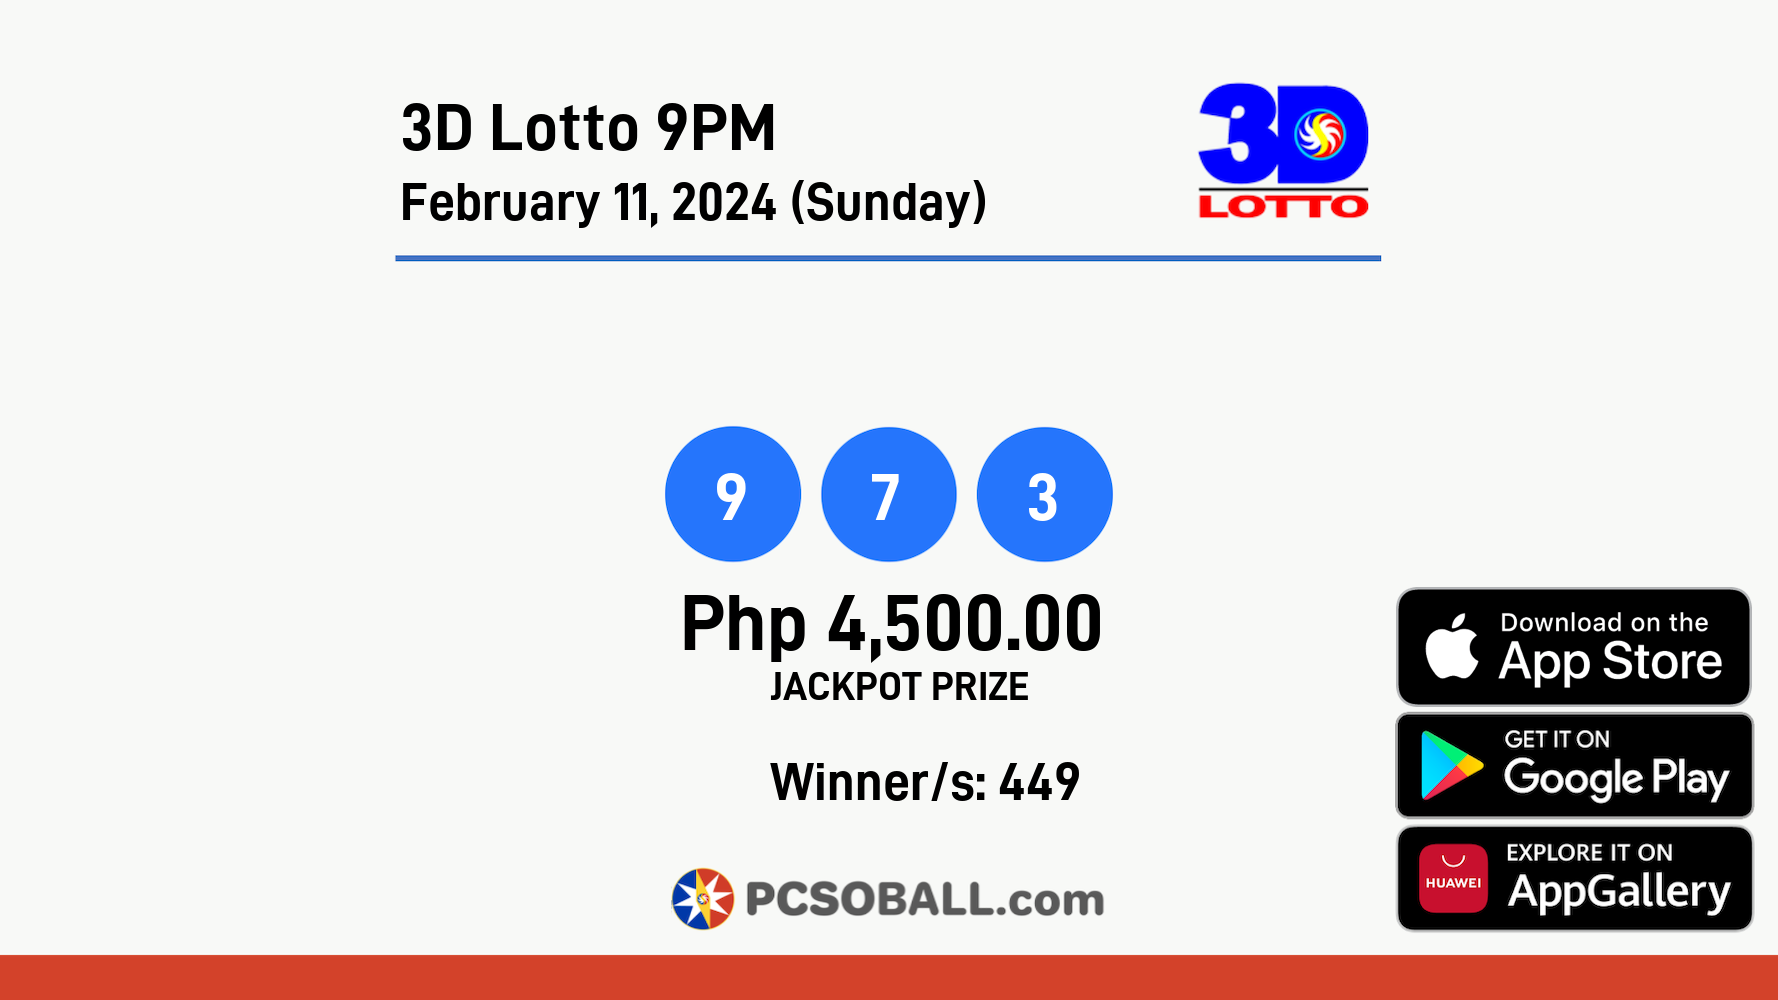 3D Lotto 9PM February 11, 2024 (Sunday) Result